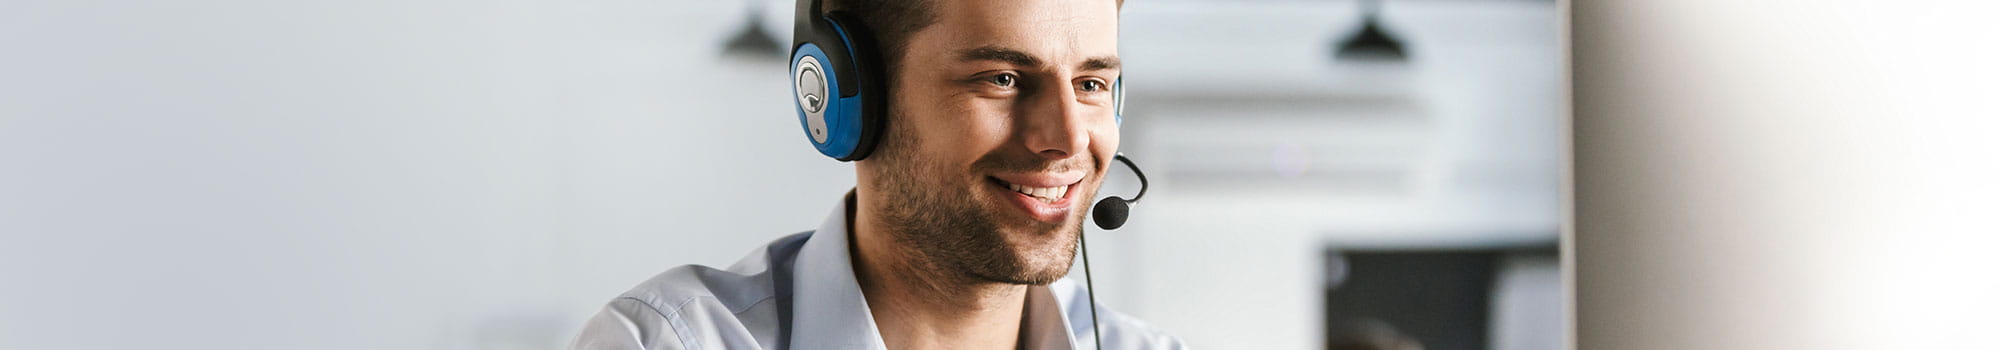 Call center employee with headset in front of a computer and another employee in the background